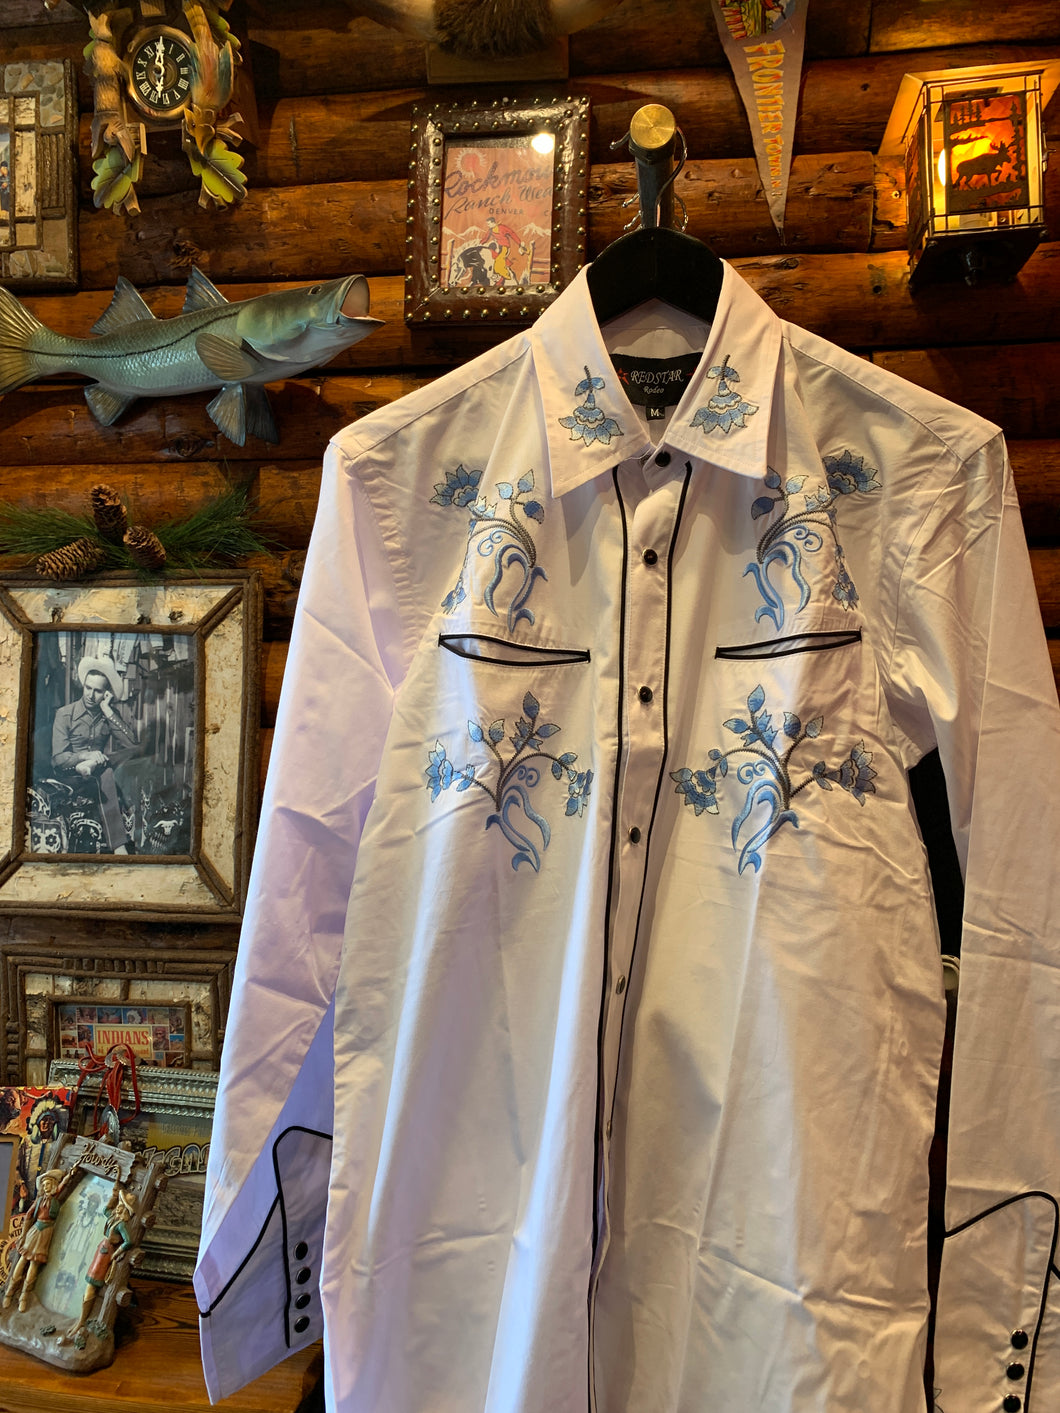 Red Star Rodeo Fully Embroidered Western Shirt. Import